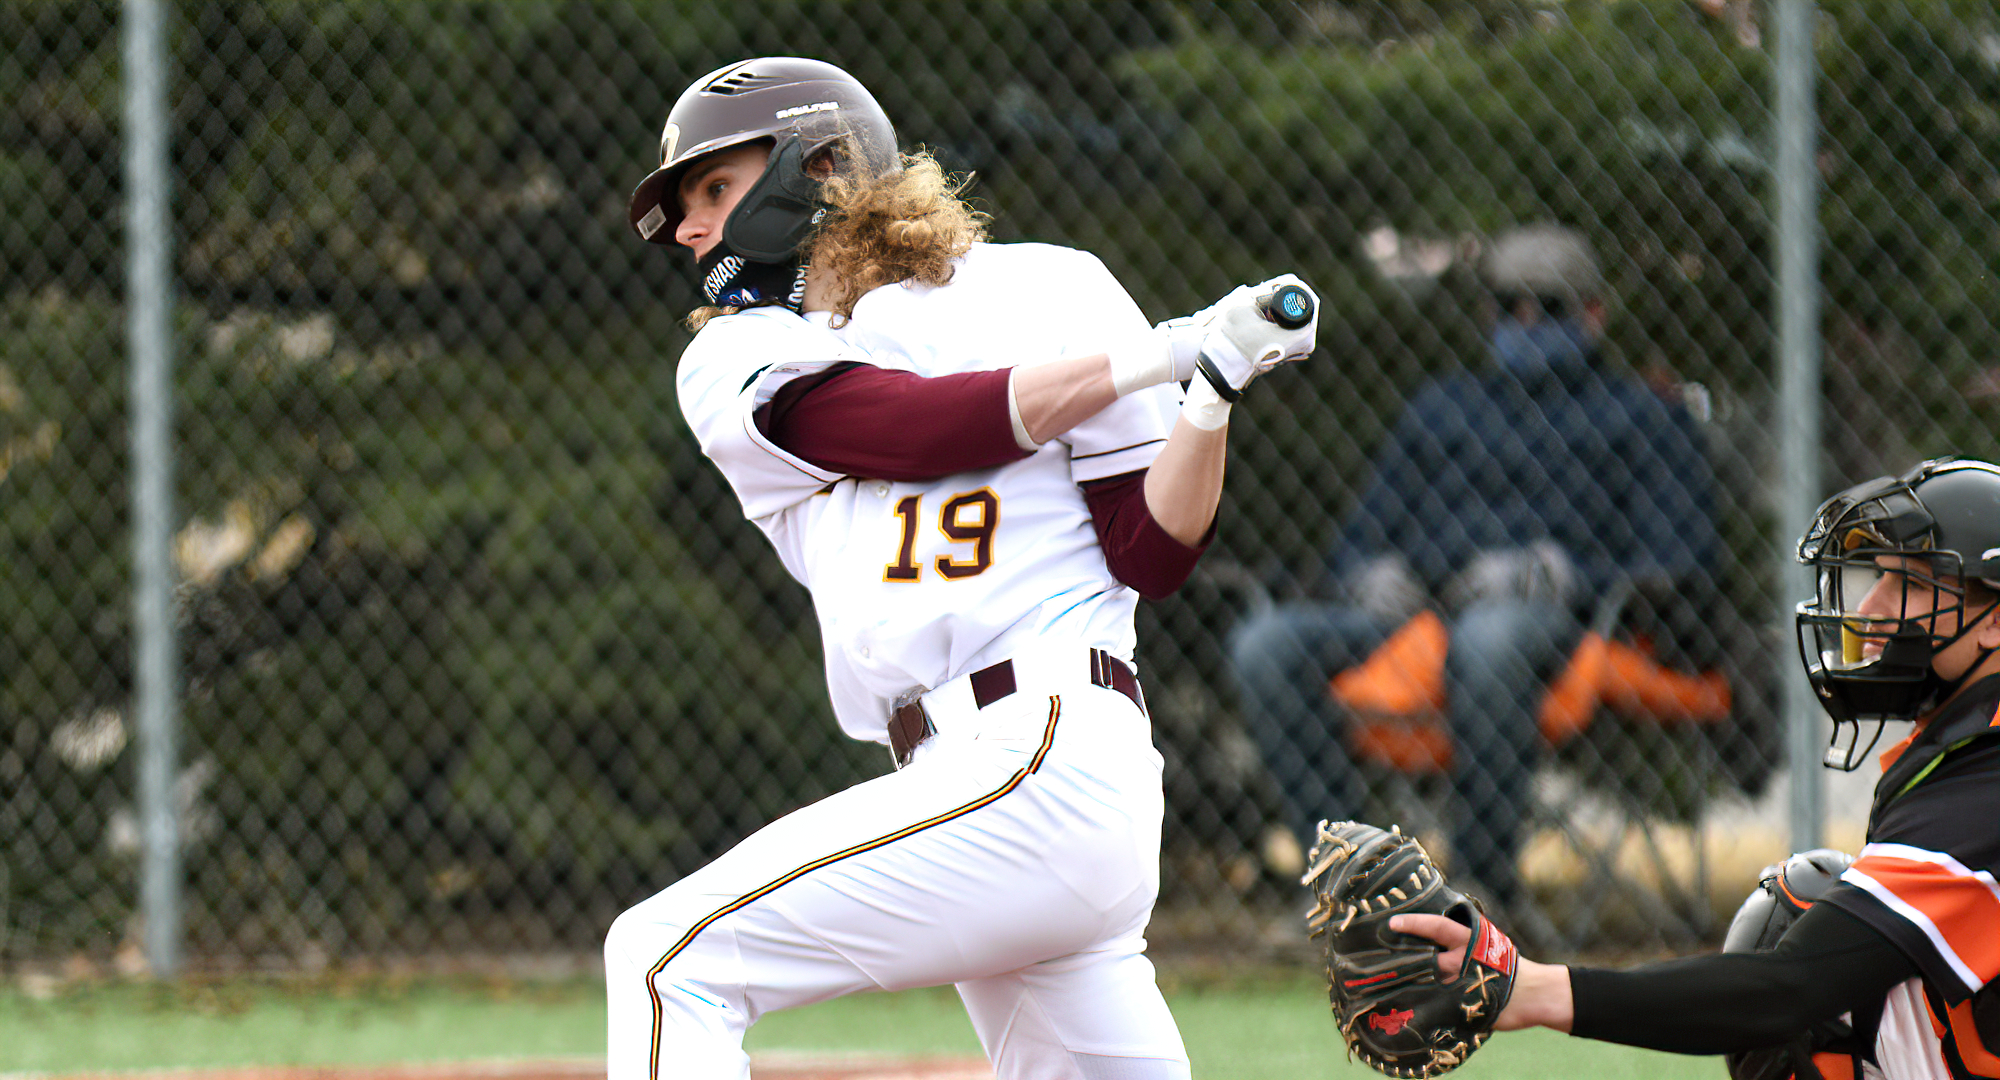 Max Boran went 3-for-3 in the second game at Macalester and finished the day 4-for-6 in the Cobbers' split with the Scots.